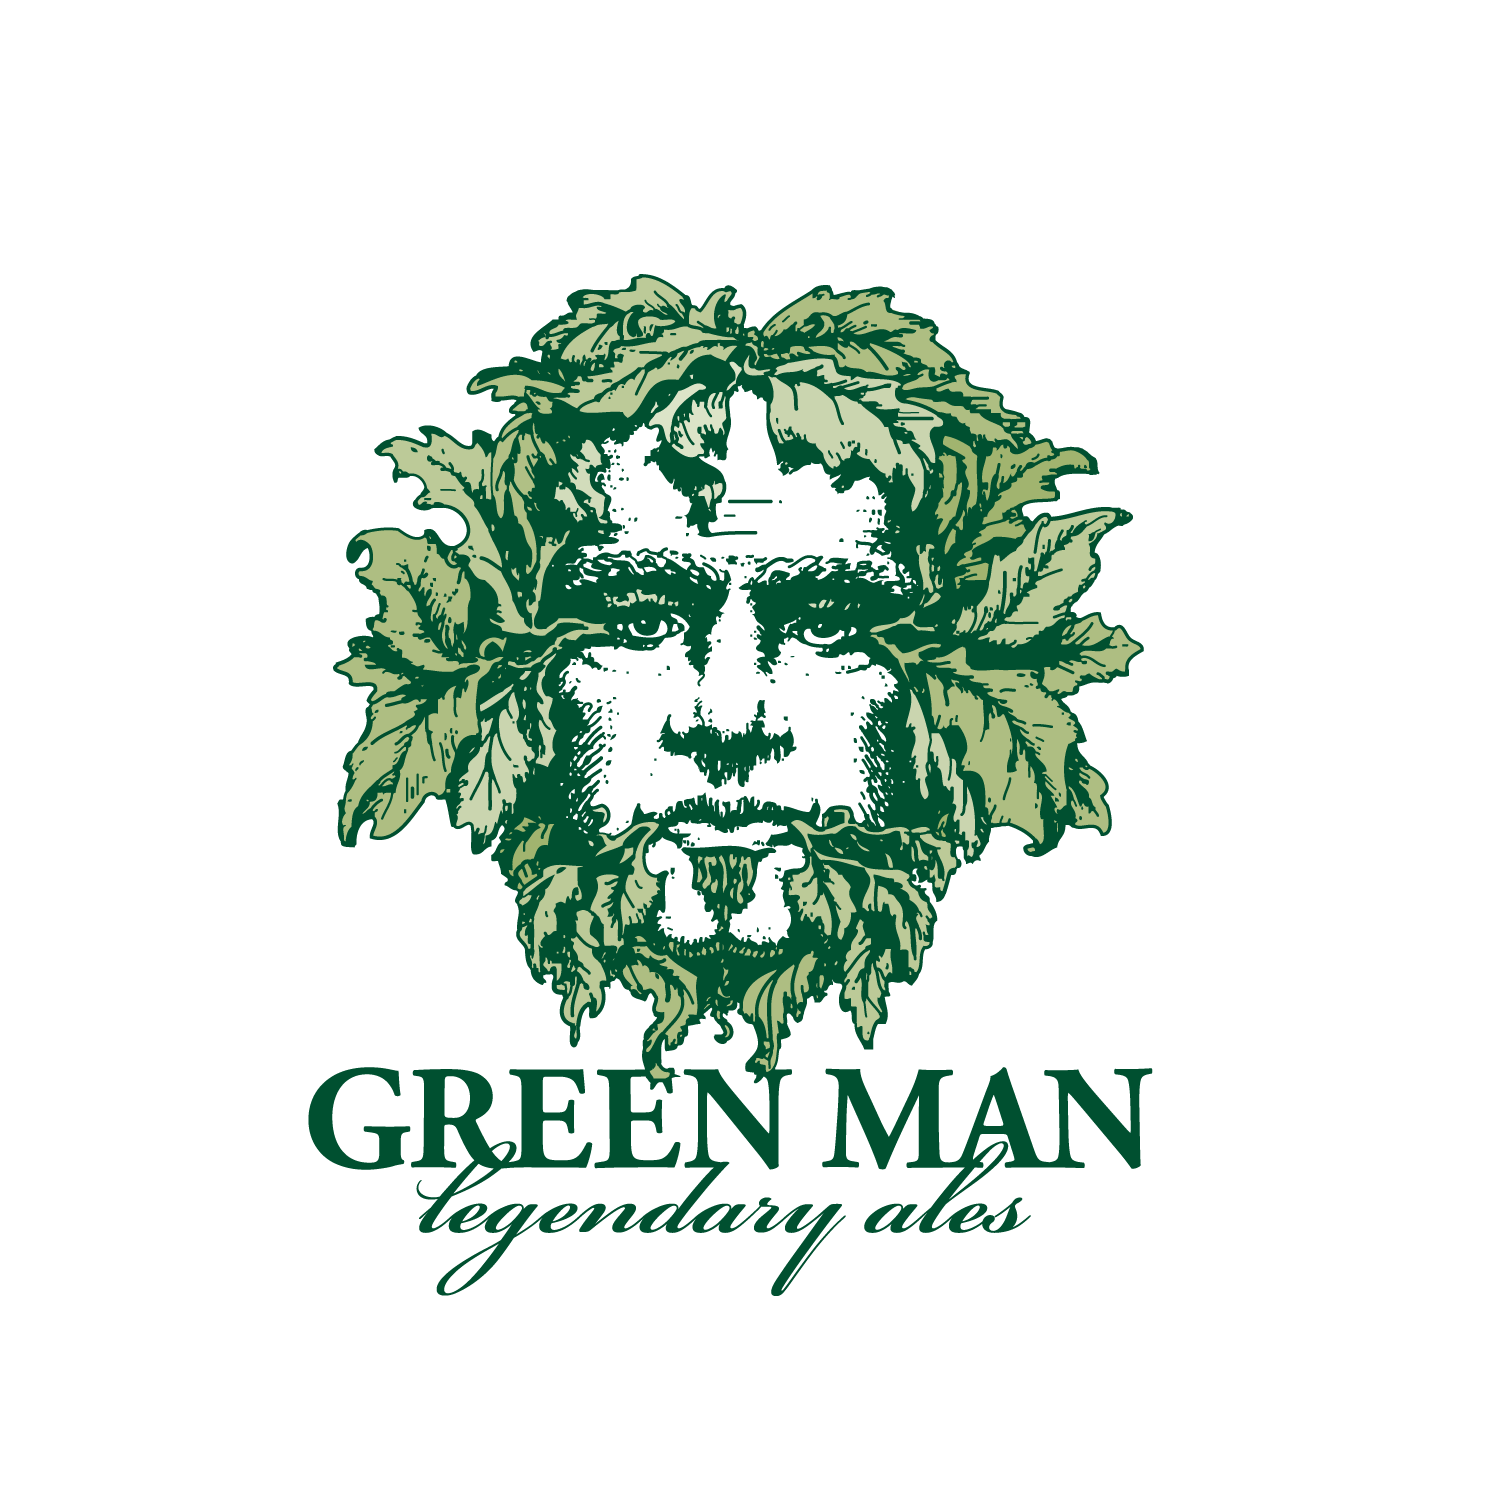 Brew Hub Announces Partnership with Green Man Brewing Company